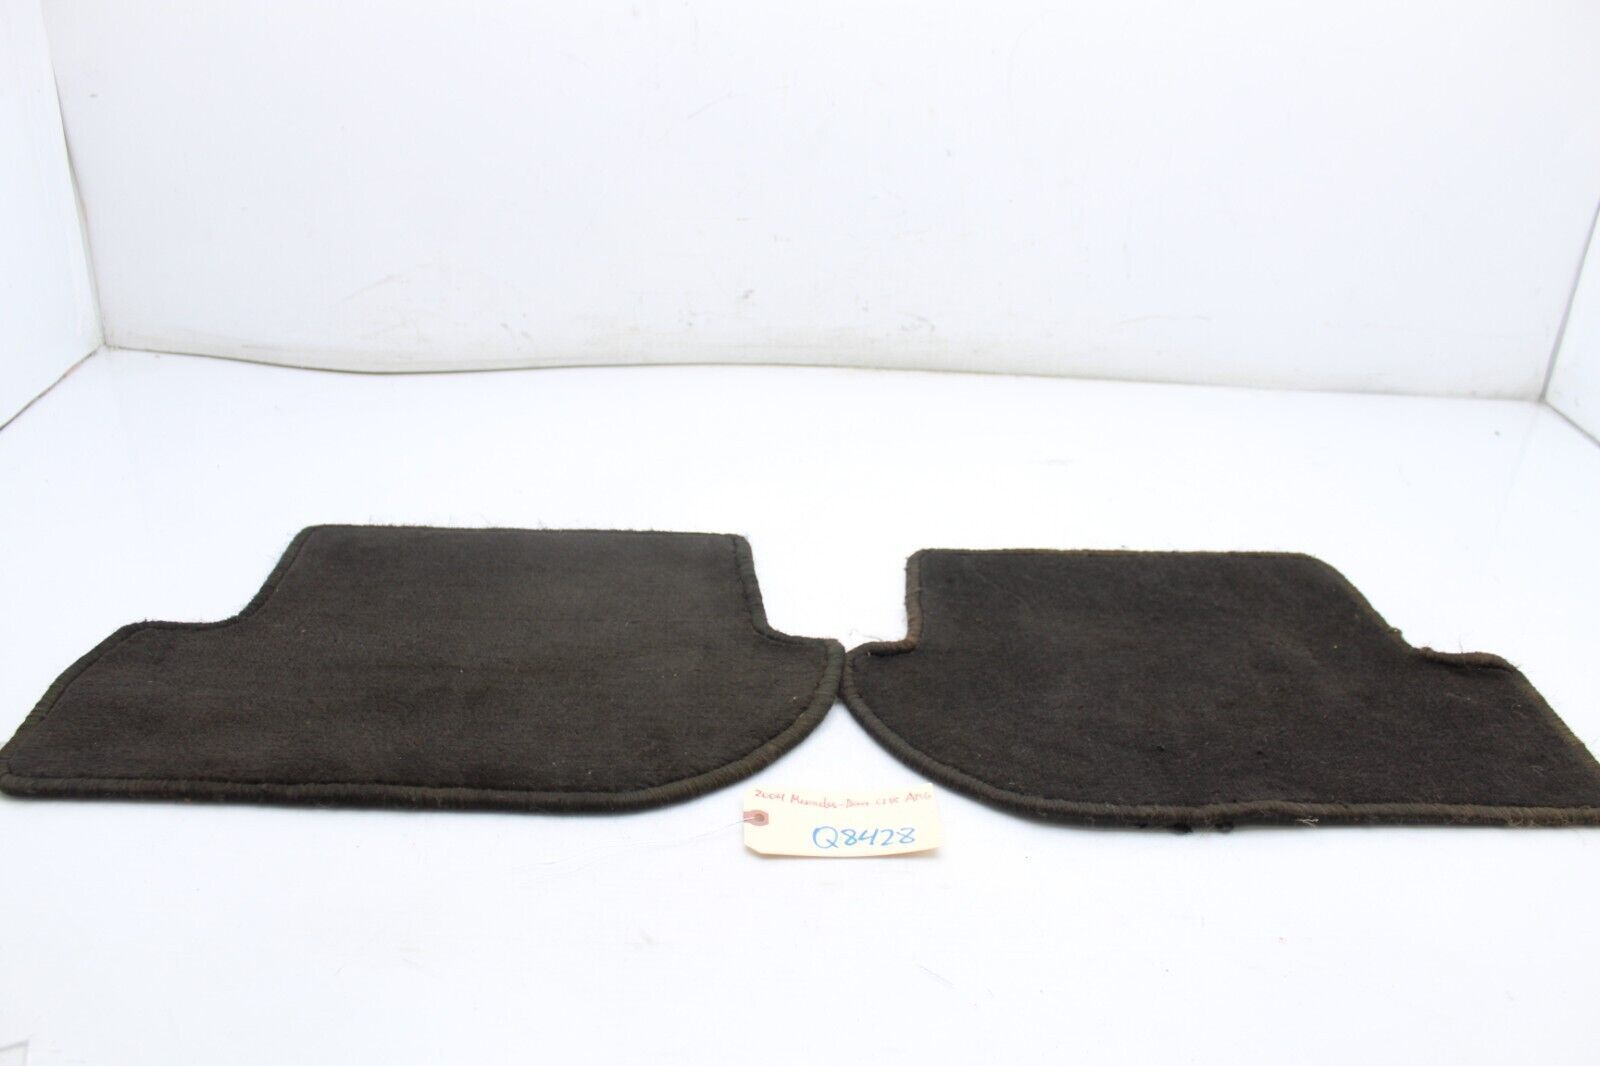 Primary image for 01-06 MERCEDES-BENZ CL55 AMG REAR FLOOR MATS PAIR Q8428